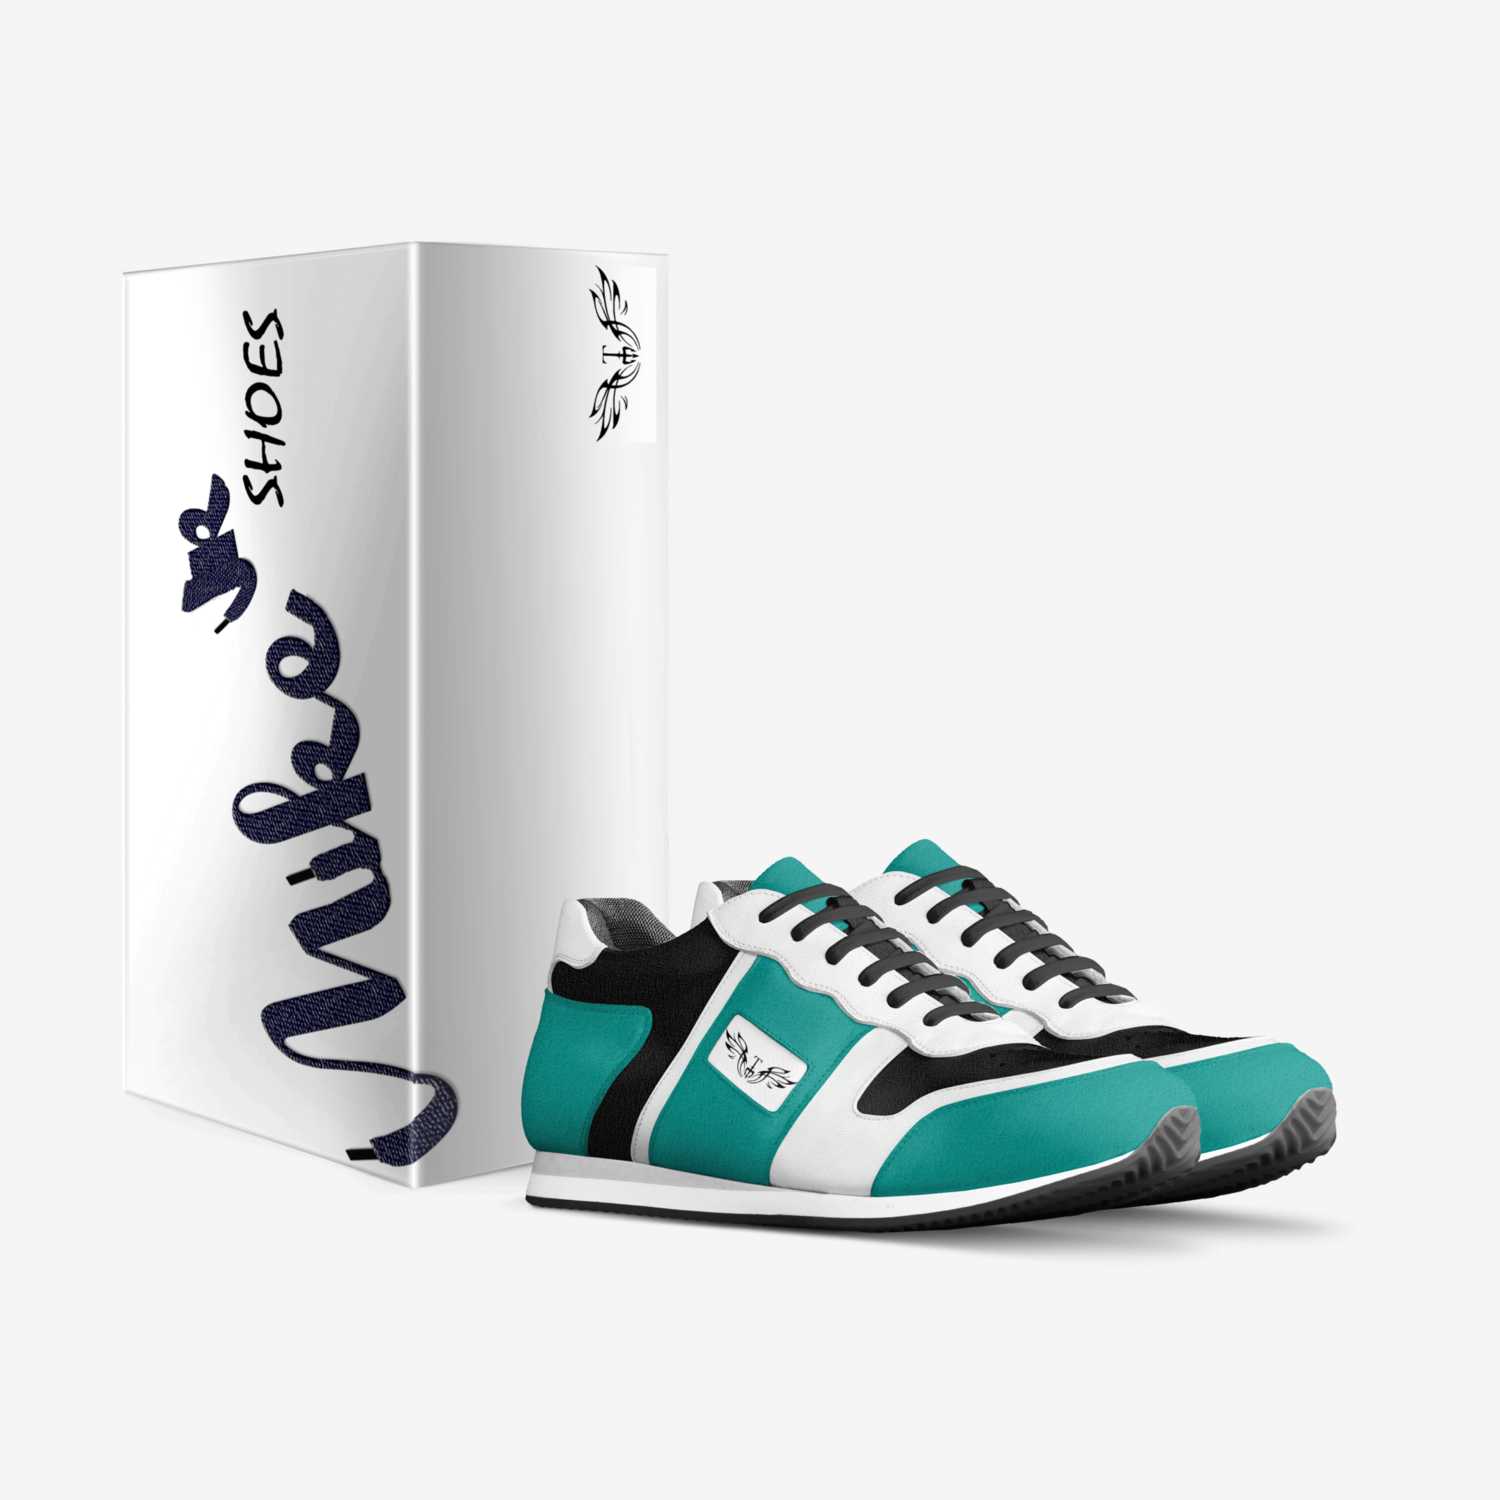 Sports custom made in Italy shoes by Mike Beers | Box view